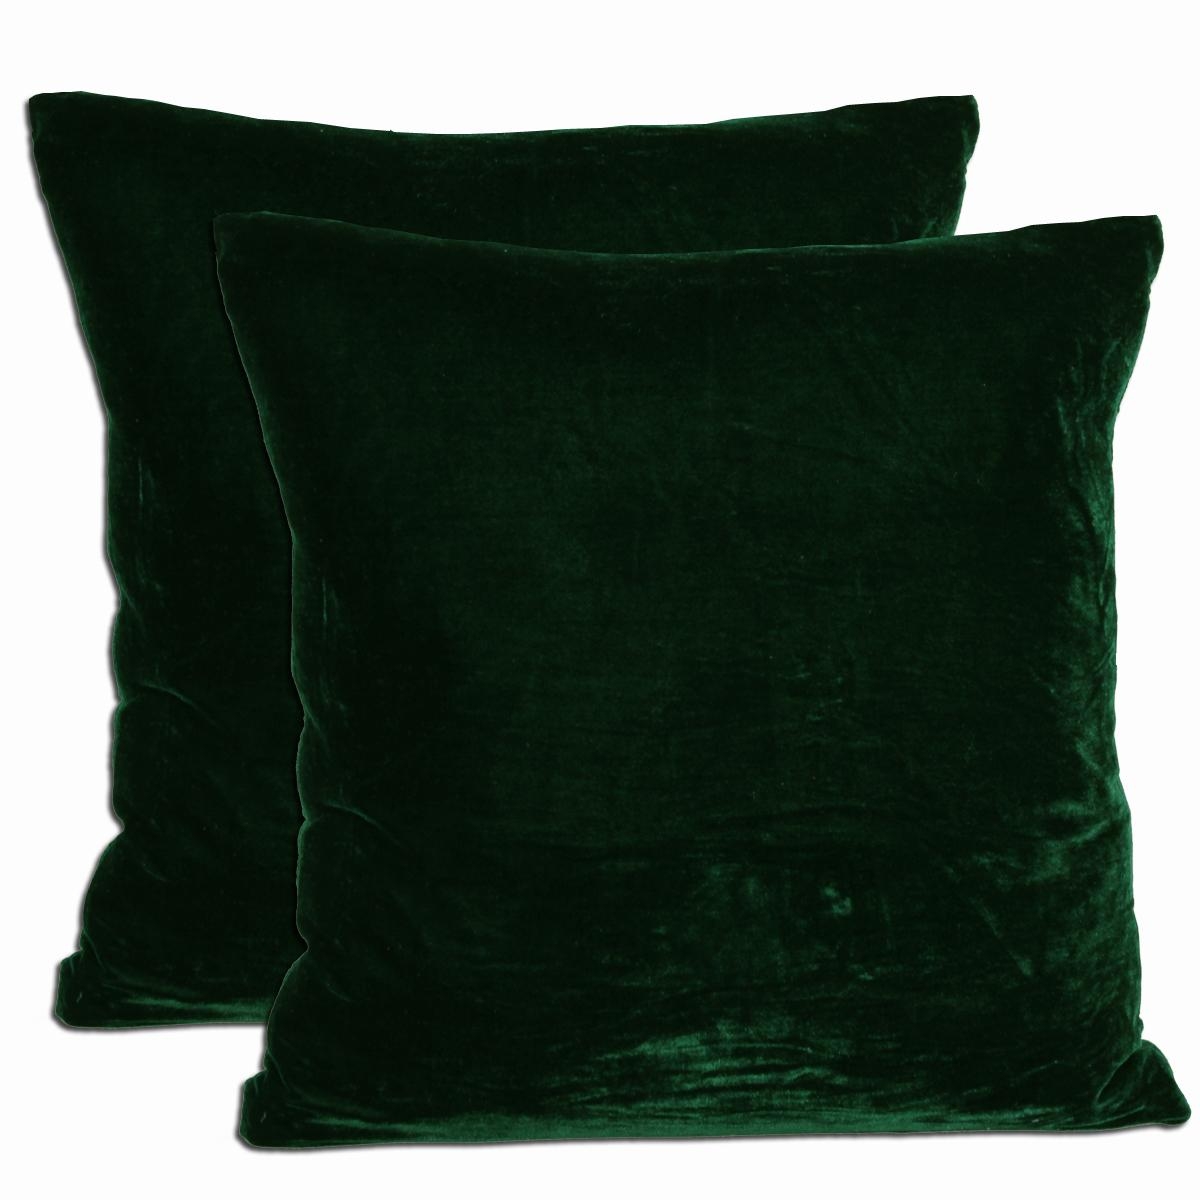 Green Velvet Feather and Down Filled Throw Pillows (Set of 2)-Green-Insert-18"x18" - Image 0